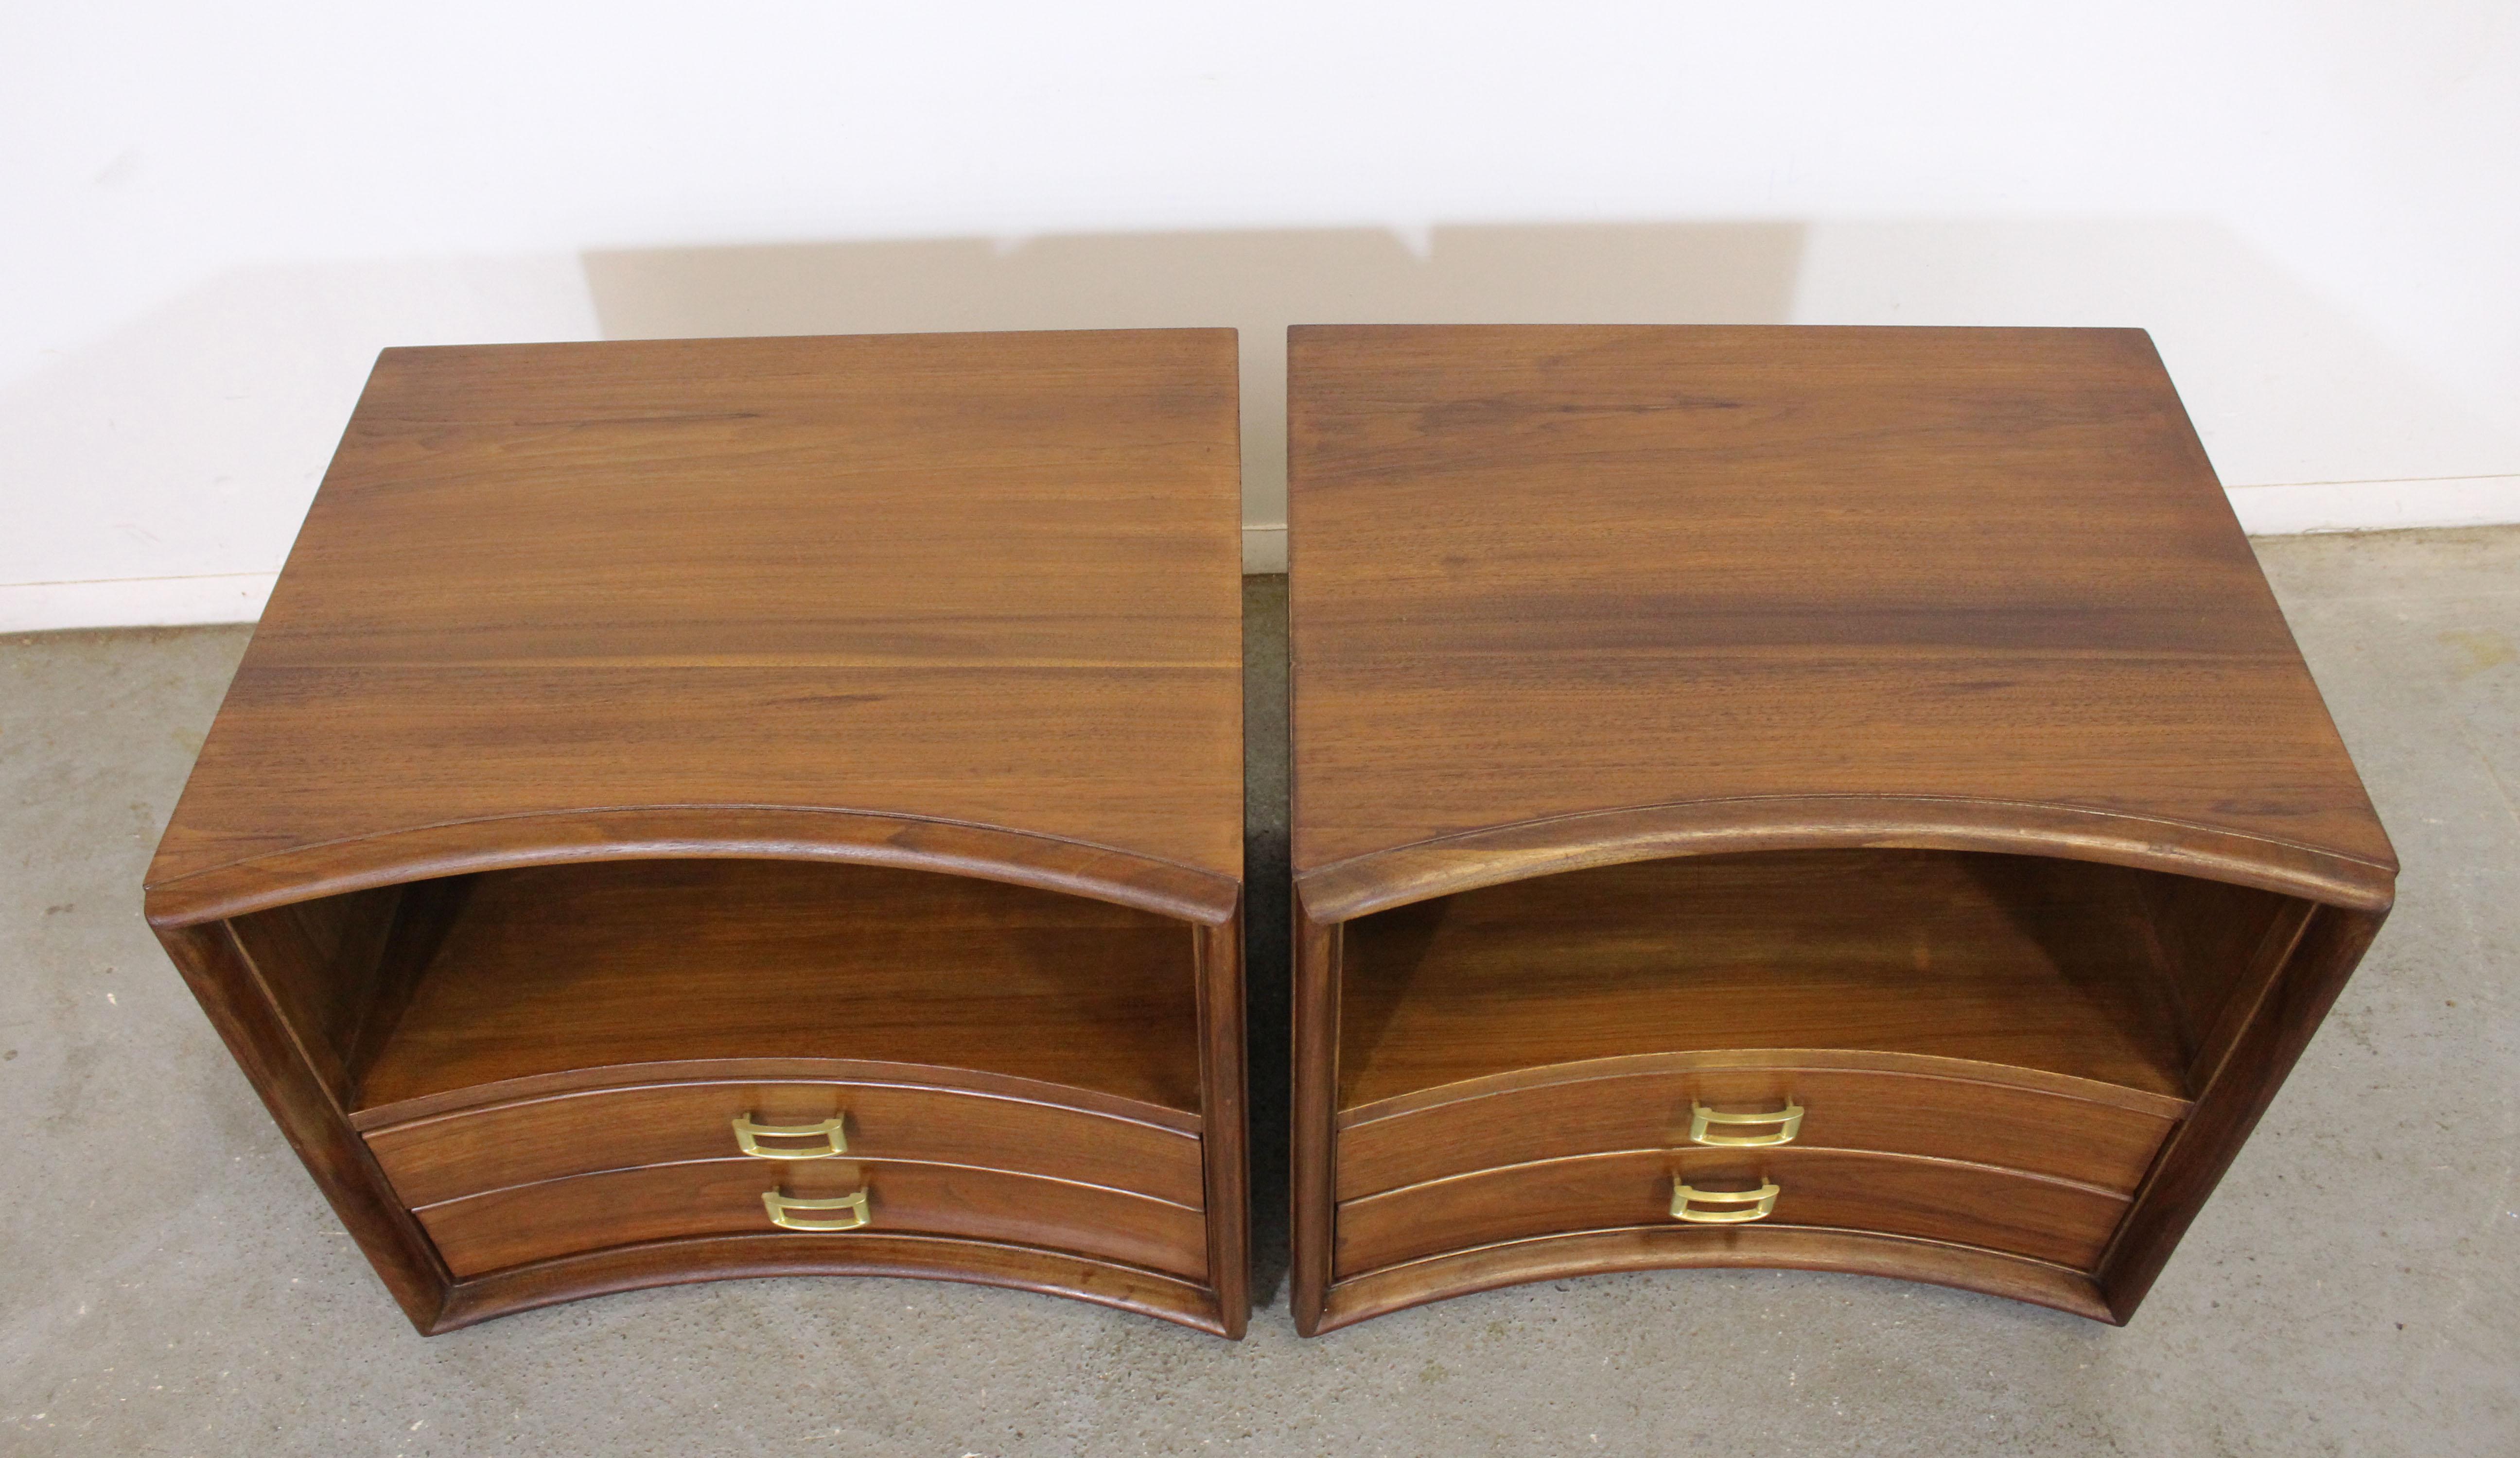 20th Century Pair of Mid-Century Modern Paul Frankl Johnson 'Emissary' Curved Nightstands